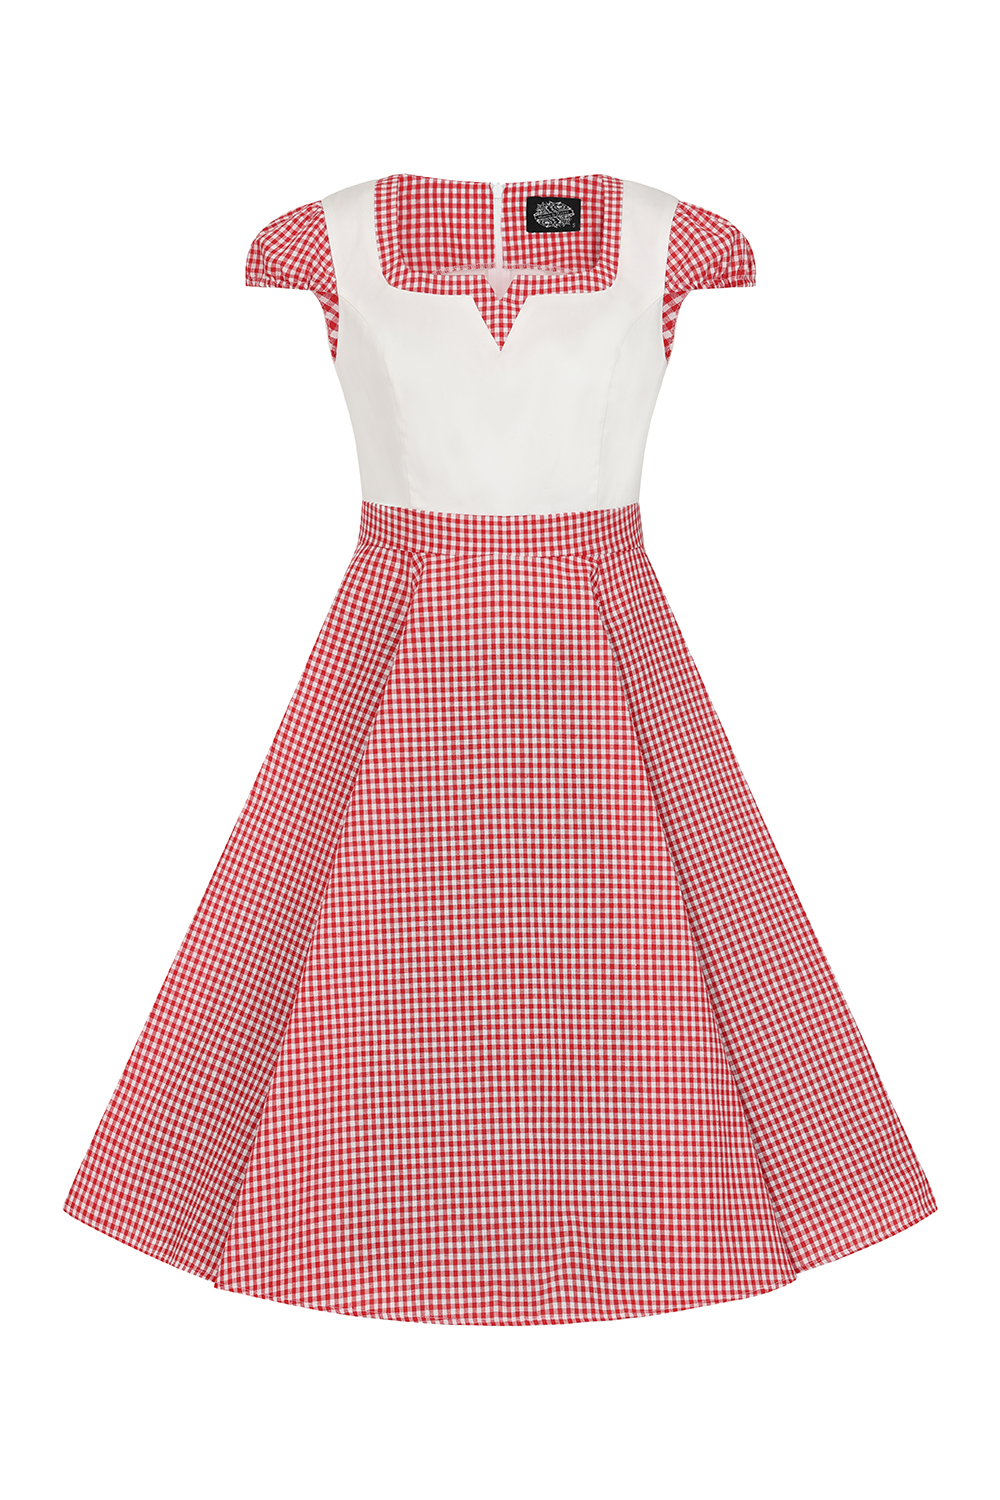 Chelsea Check Swing Dress in Red